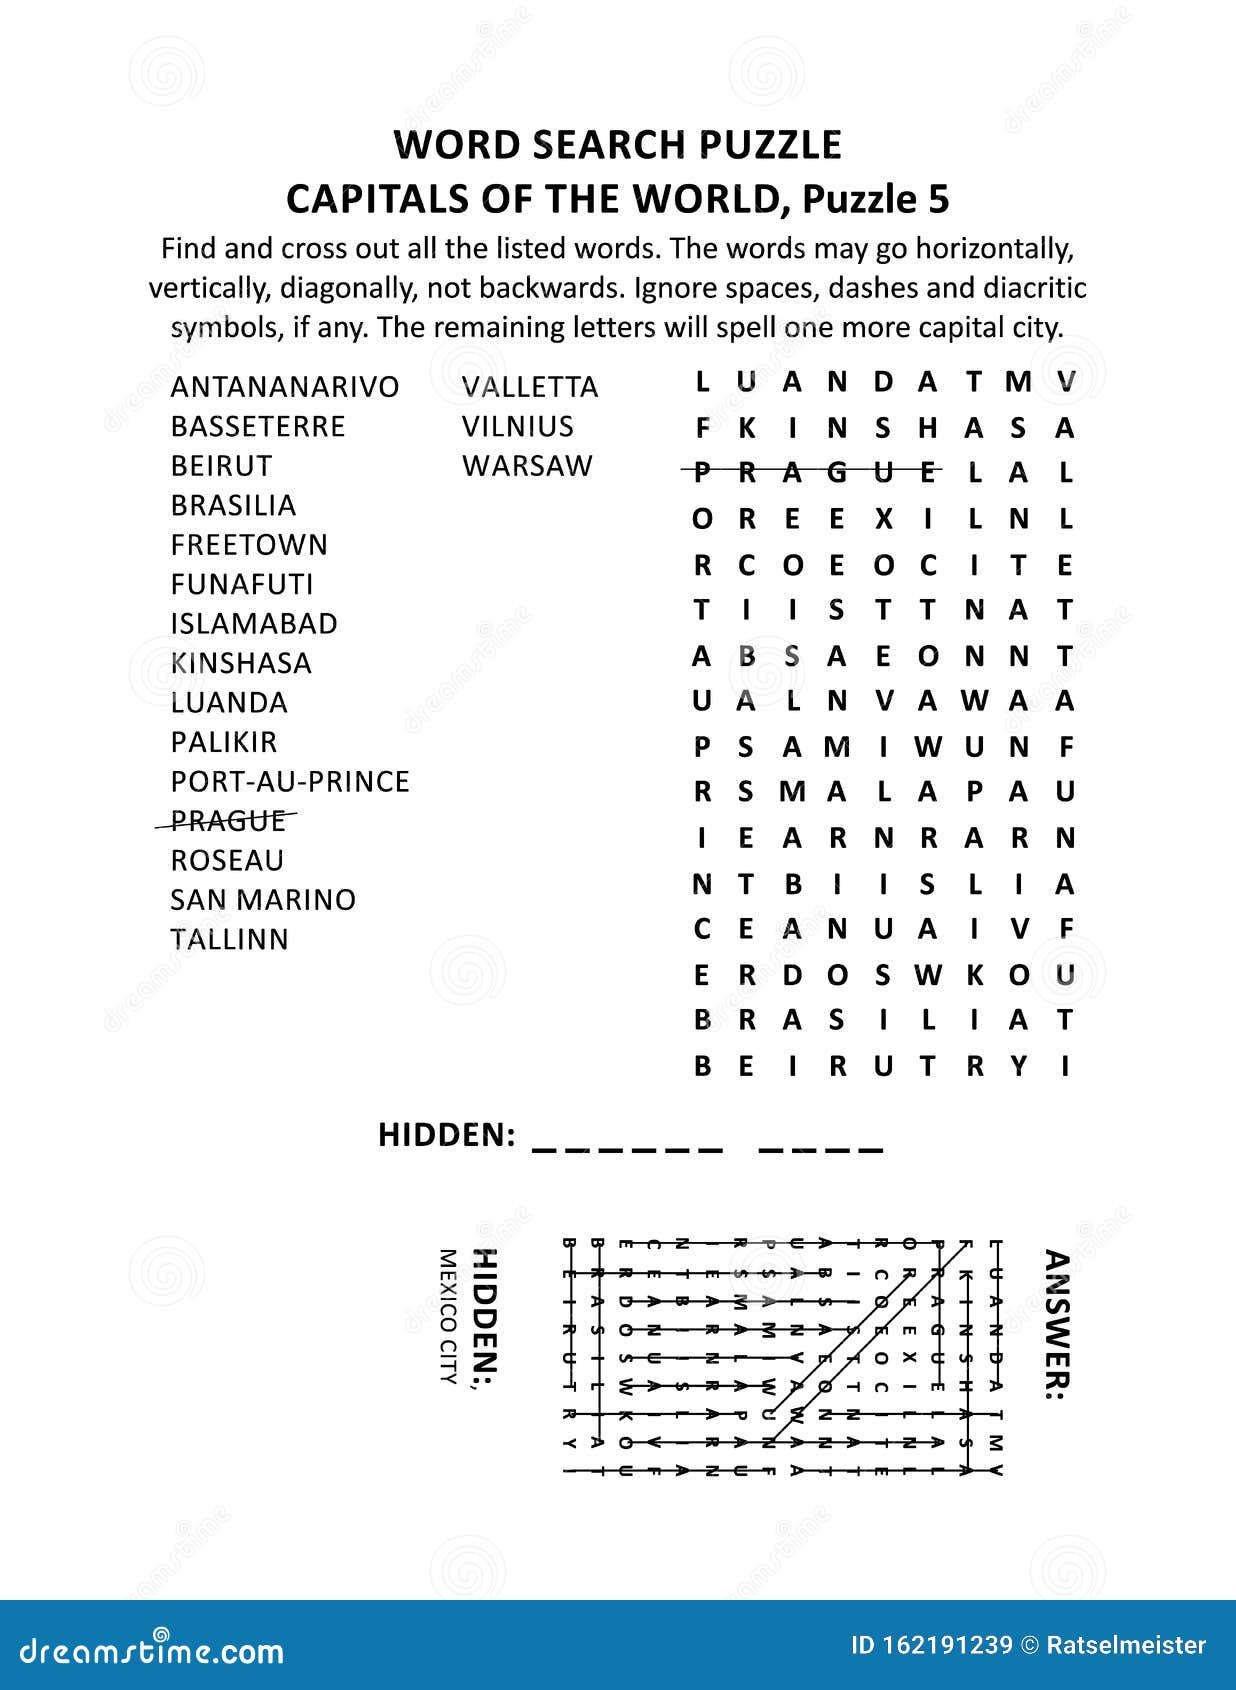 capitals of the world word search puzzle, puzzle 5 of 10